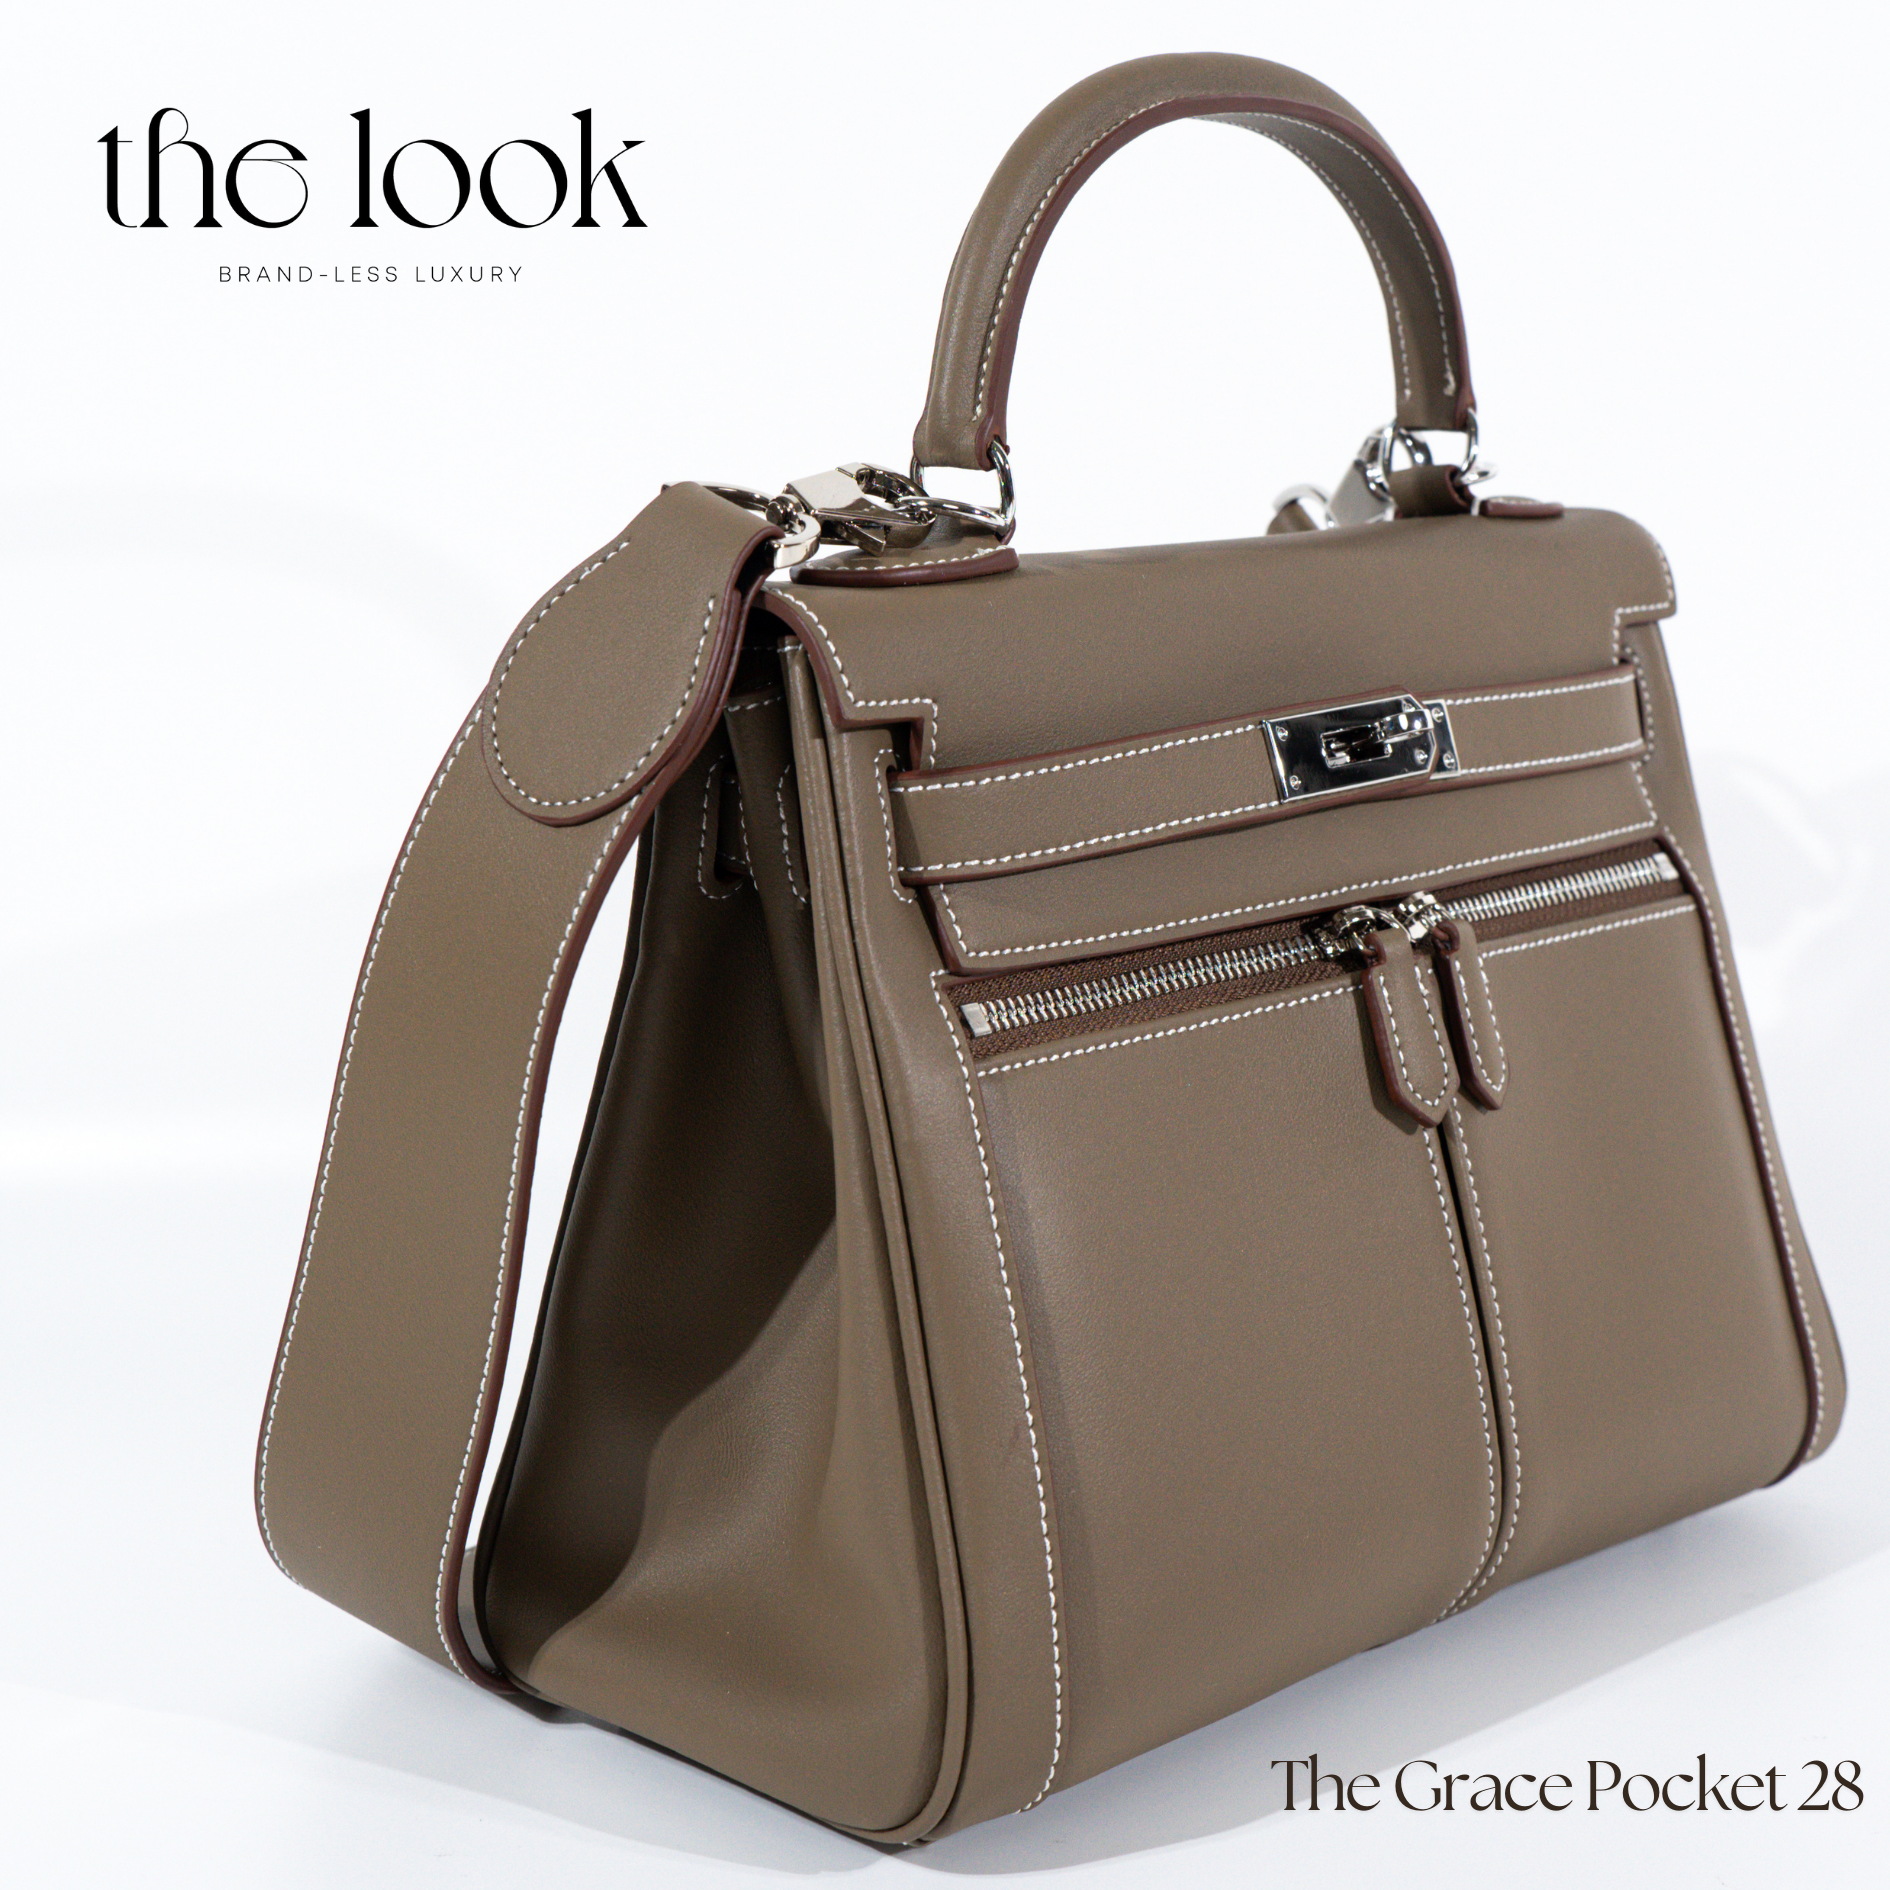 The Grace 28 Pocket Swift Leather Etoupe SHW by The Look